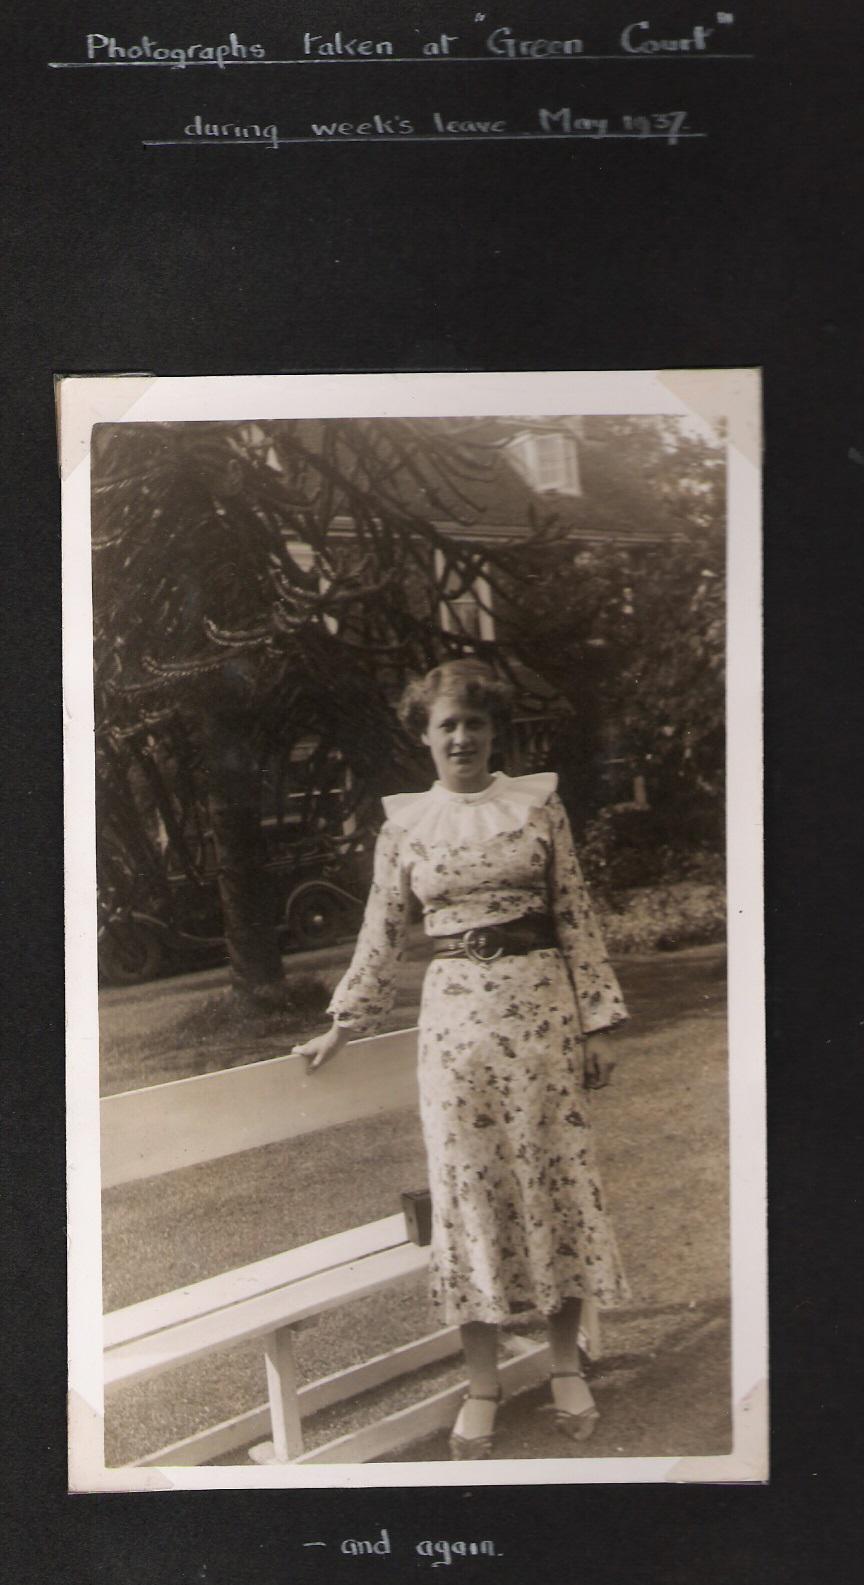 1936 - Mary Macafee - Outside Green Court